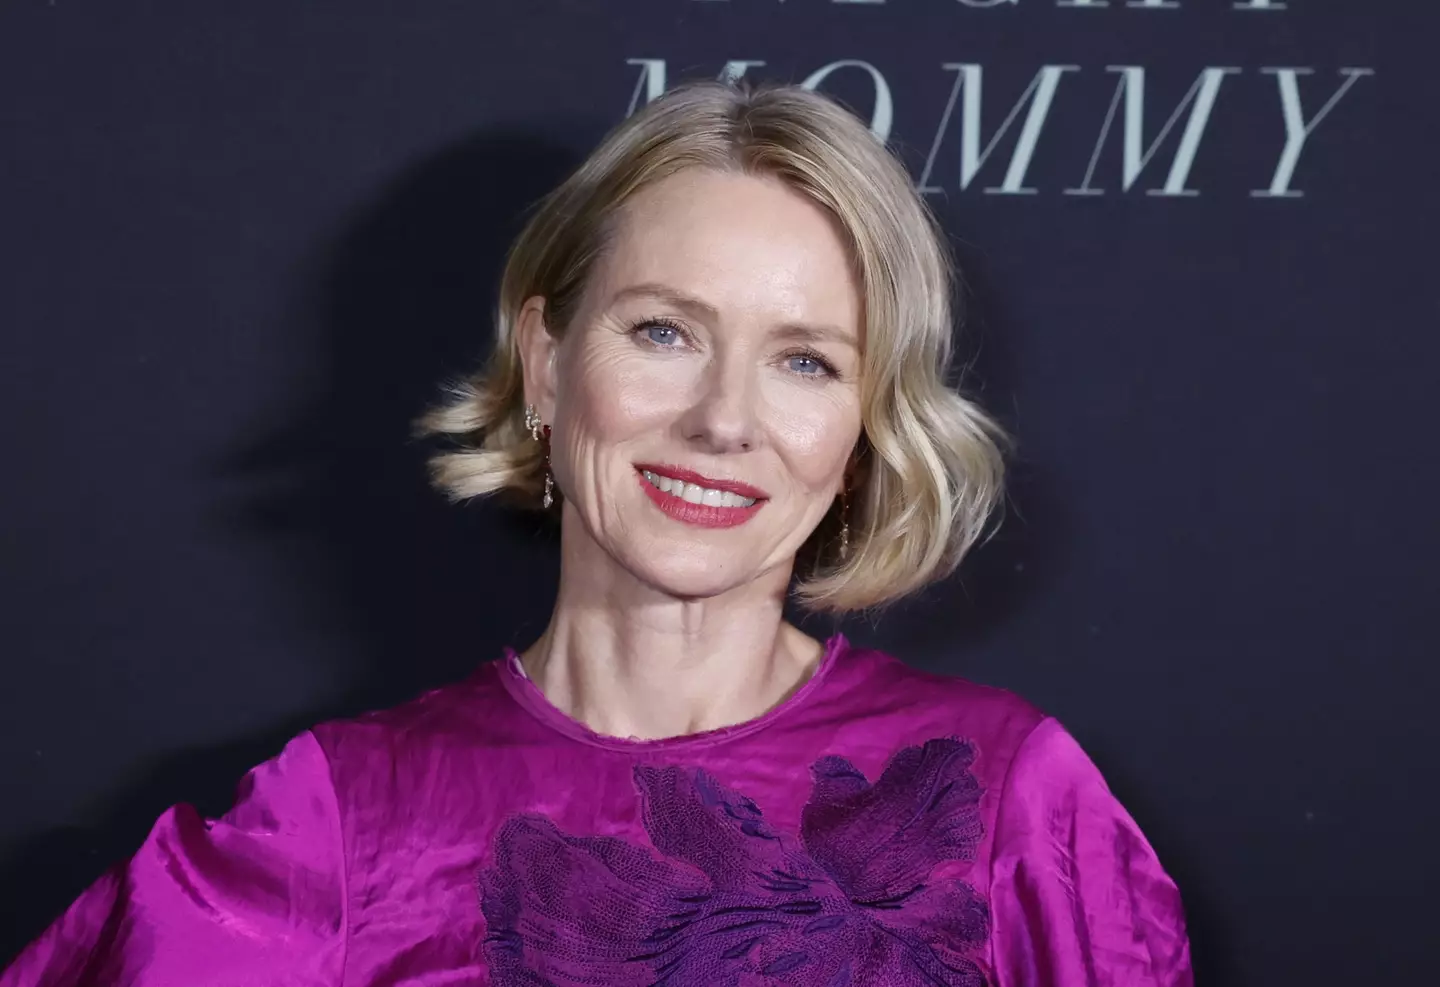 Naomi Watts was told she'd struggle to find work after hitting 40.